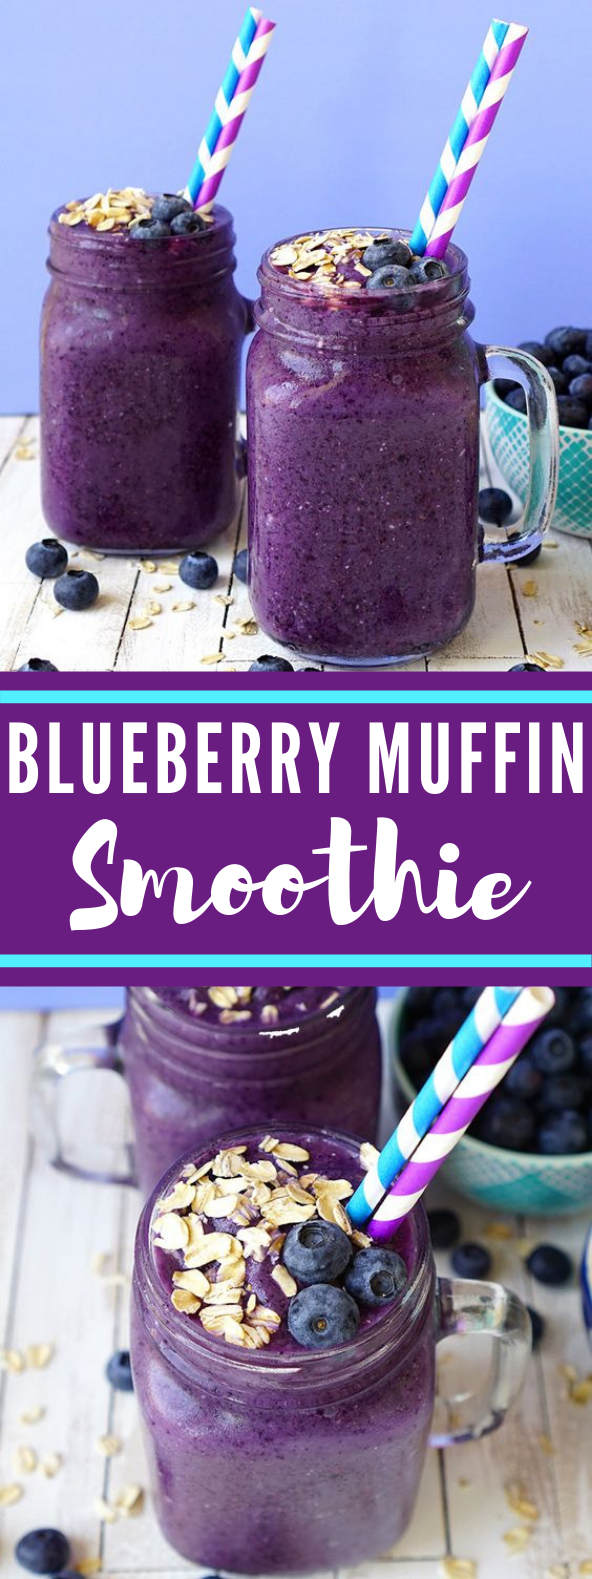 HEALTHY BLUEBERRY MUFFIN SMOOTHIE RECIPE #HealthyDrink #Smoothie